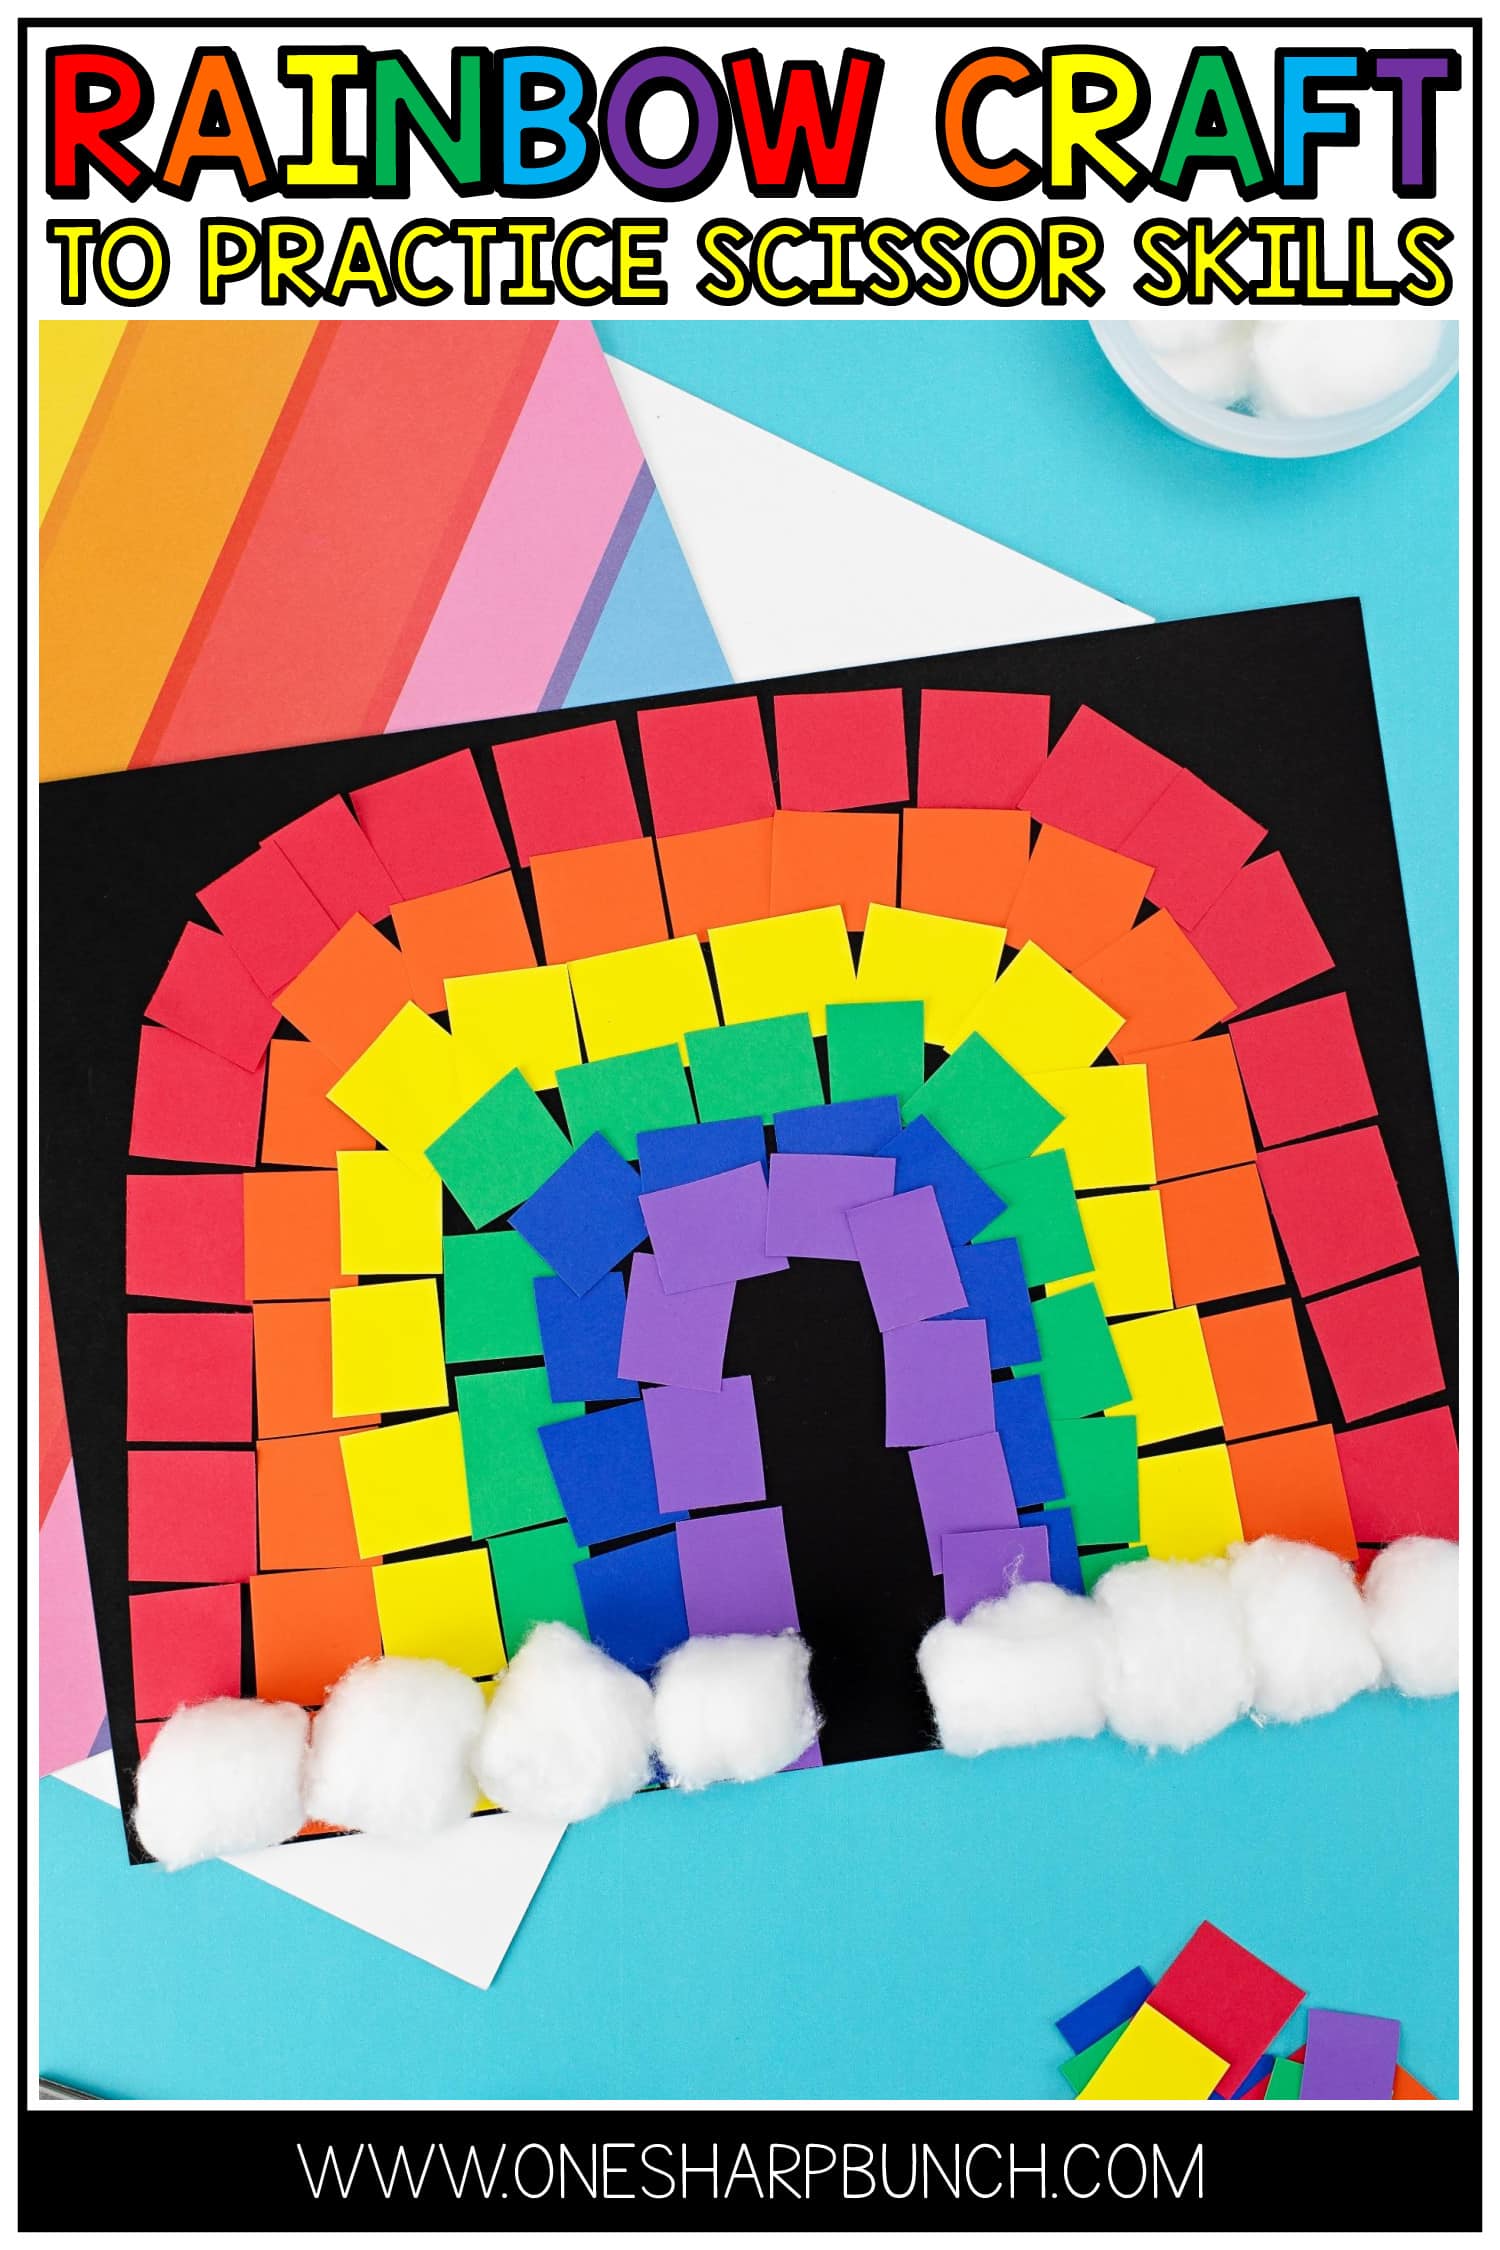 This is one of the best rainbow crafts for kids! It is fun, colorful and easy to make! Plus, your preschool and kindergarten students can practice their scissor skills and strengthen their fine motor skills as they snip each color into smaller pieces. It’s one of the perfect spring crafts for kids… especially as an addition to your St. Patrick’s Day crafts and St. Patrick’s Day activities!